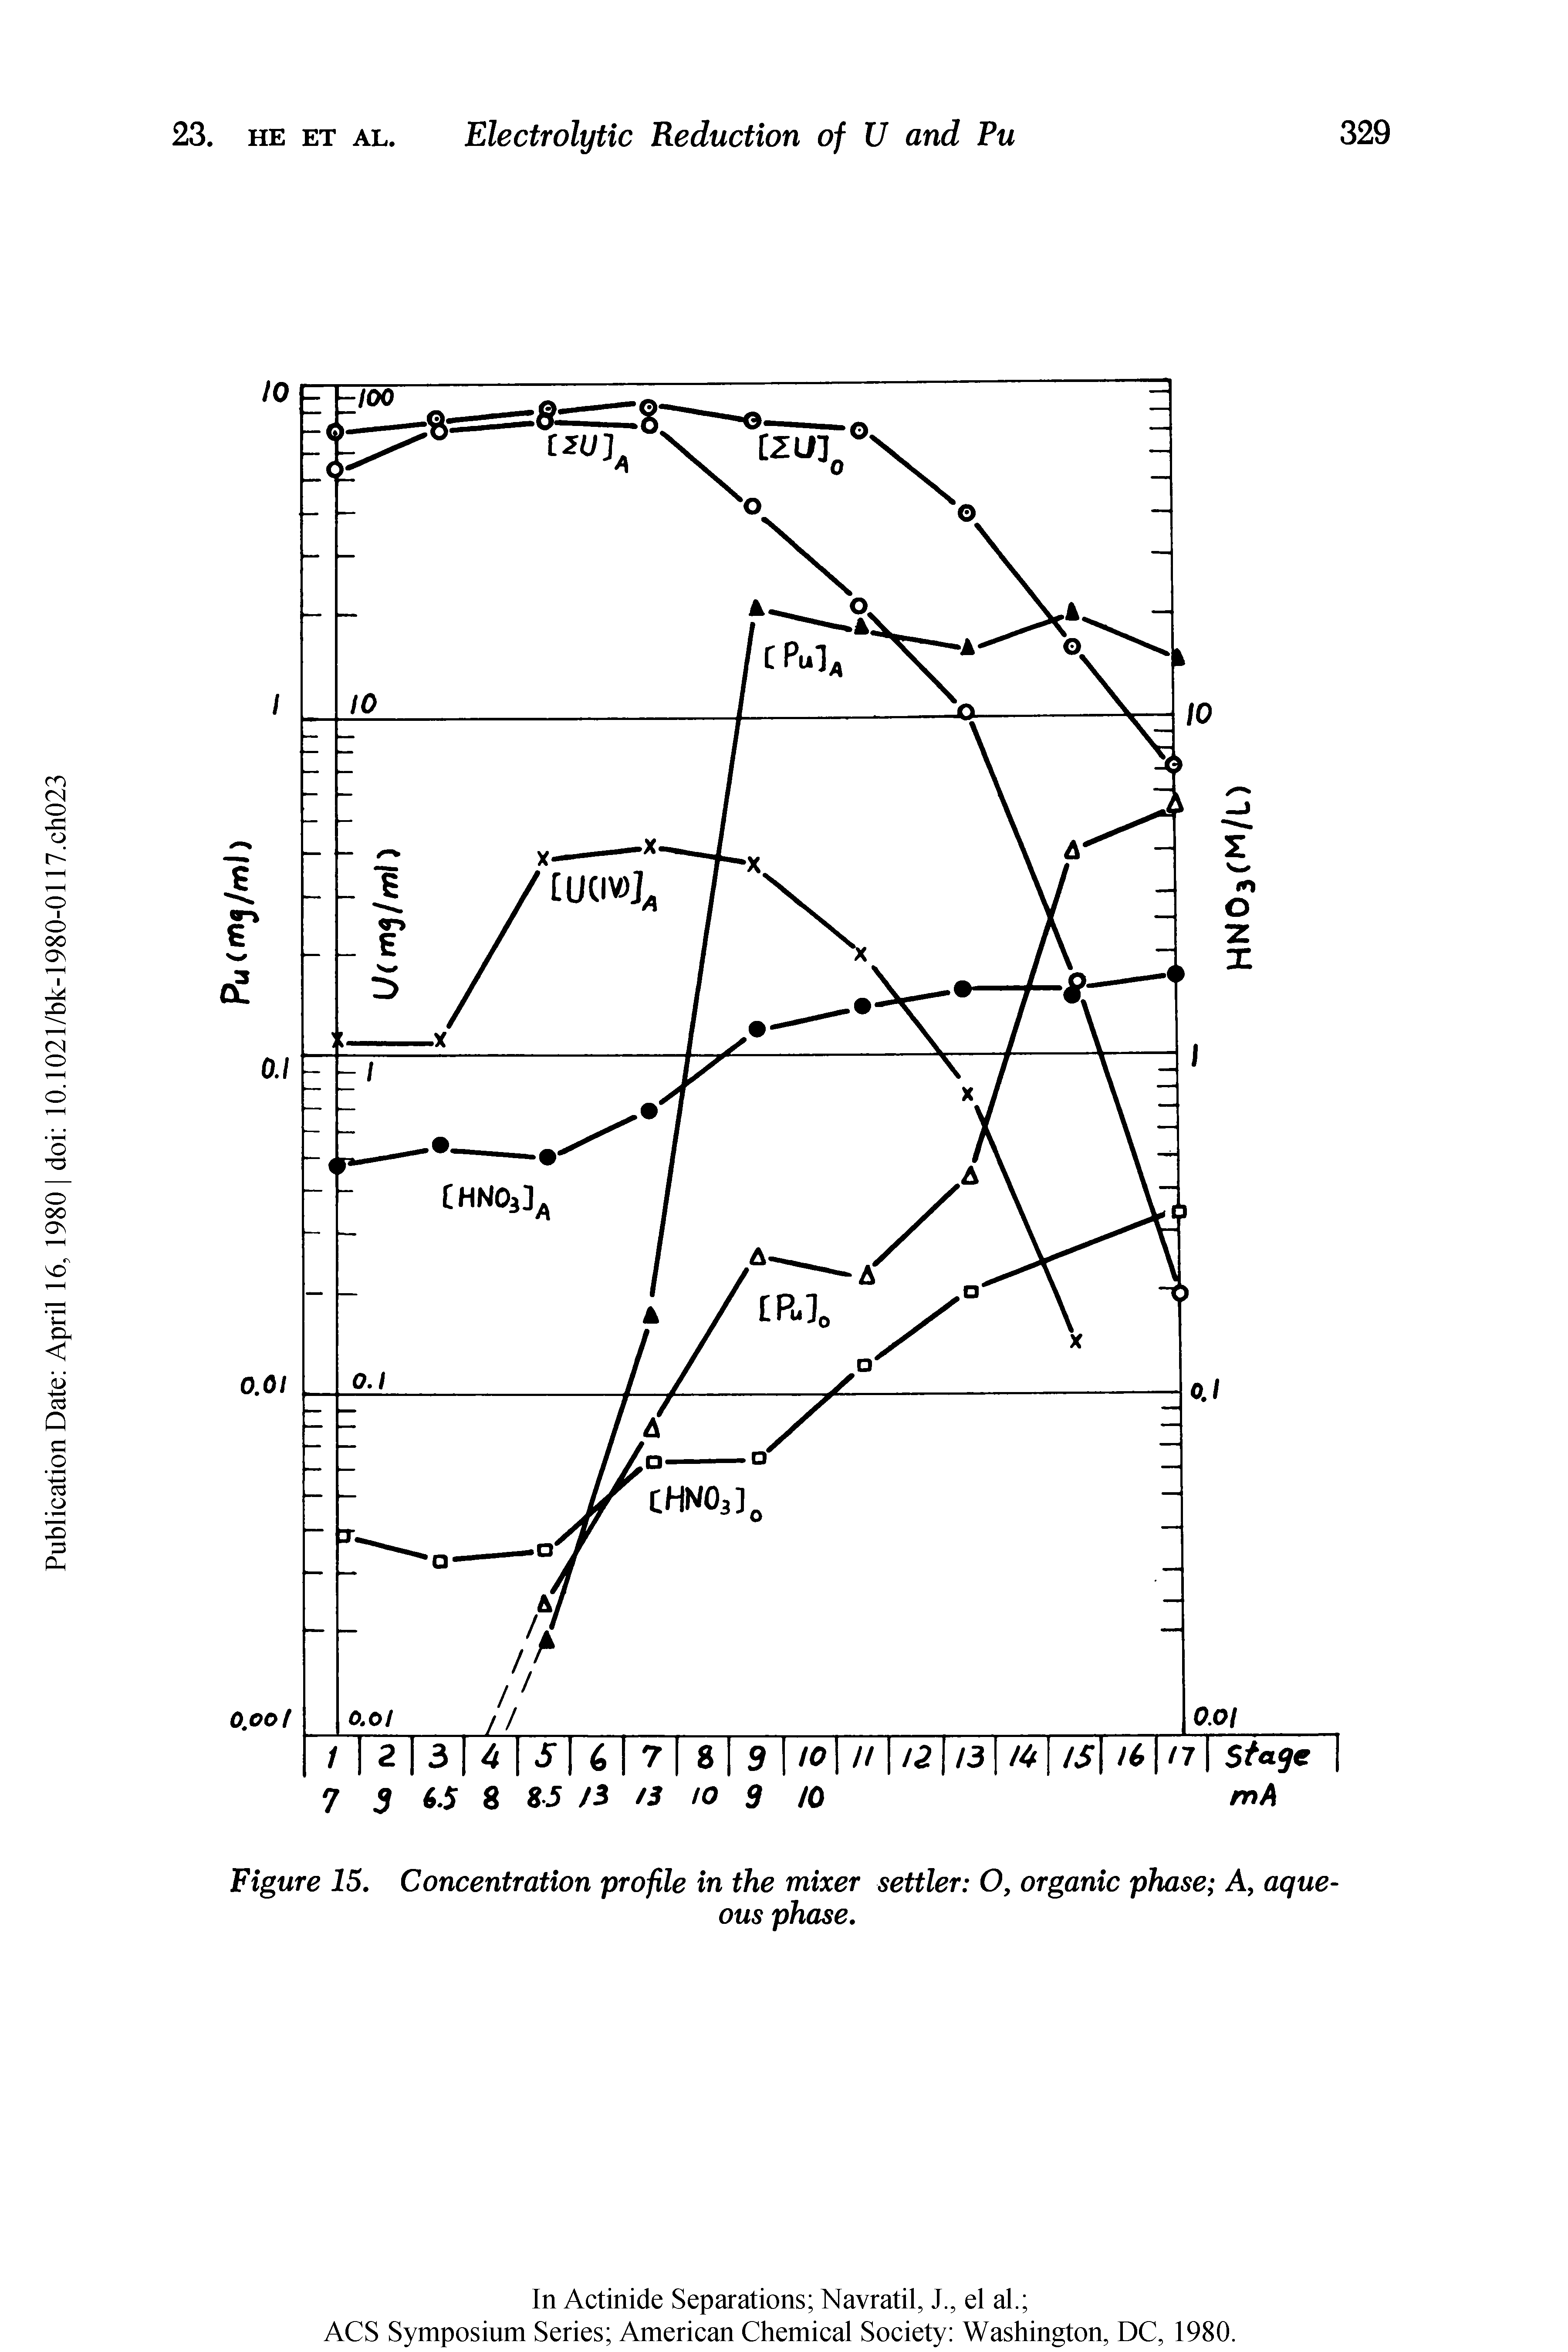 Figure 15. Concentration profile in the mixer settler O, organic phase A, aqueous phase.